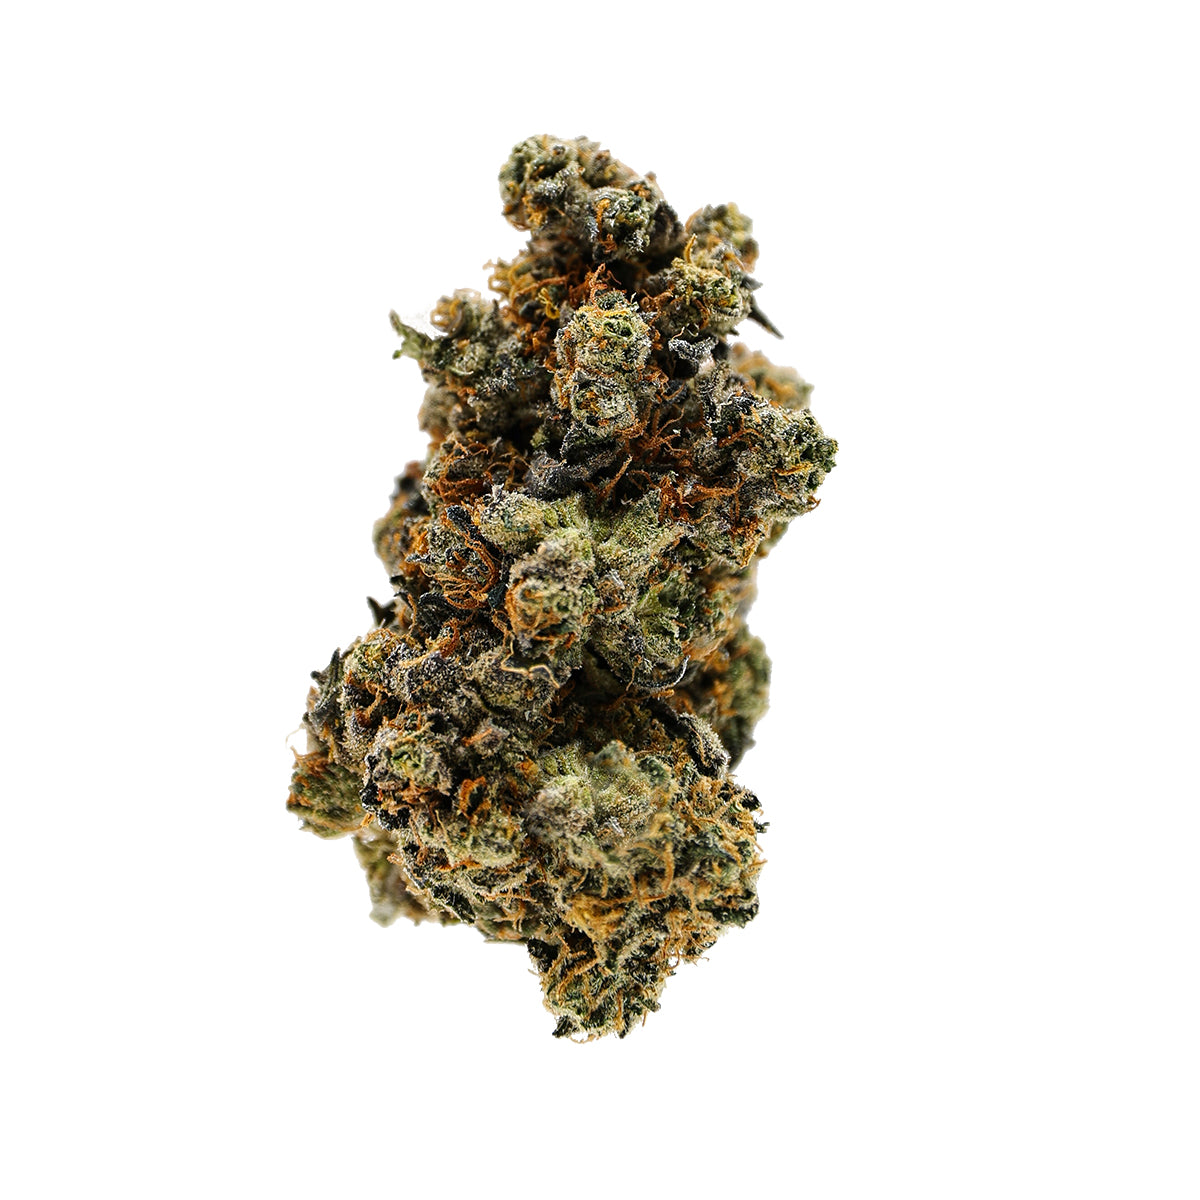 Breadstix THCa Indica Premium Hemp Flower - This indica dominant hybrid has vibrant orange pistils with dark green and purple undertones. Garlic and gasy nose with trichome covered nugs. A Must try! Available in 3.5g and 14g size jars.